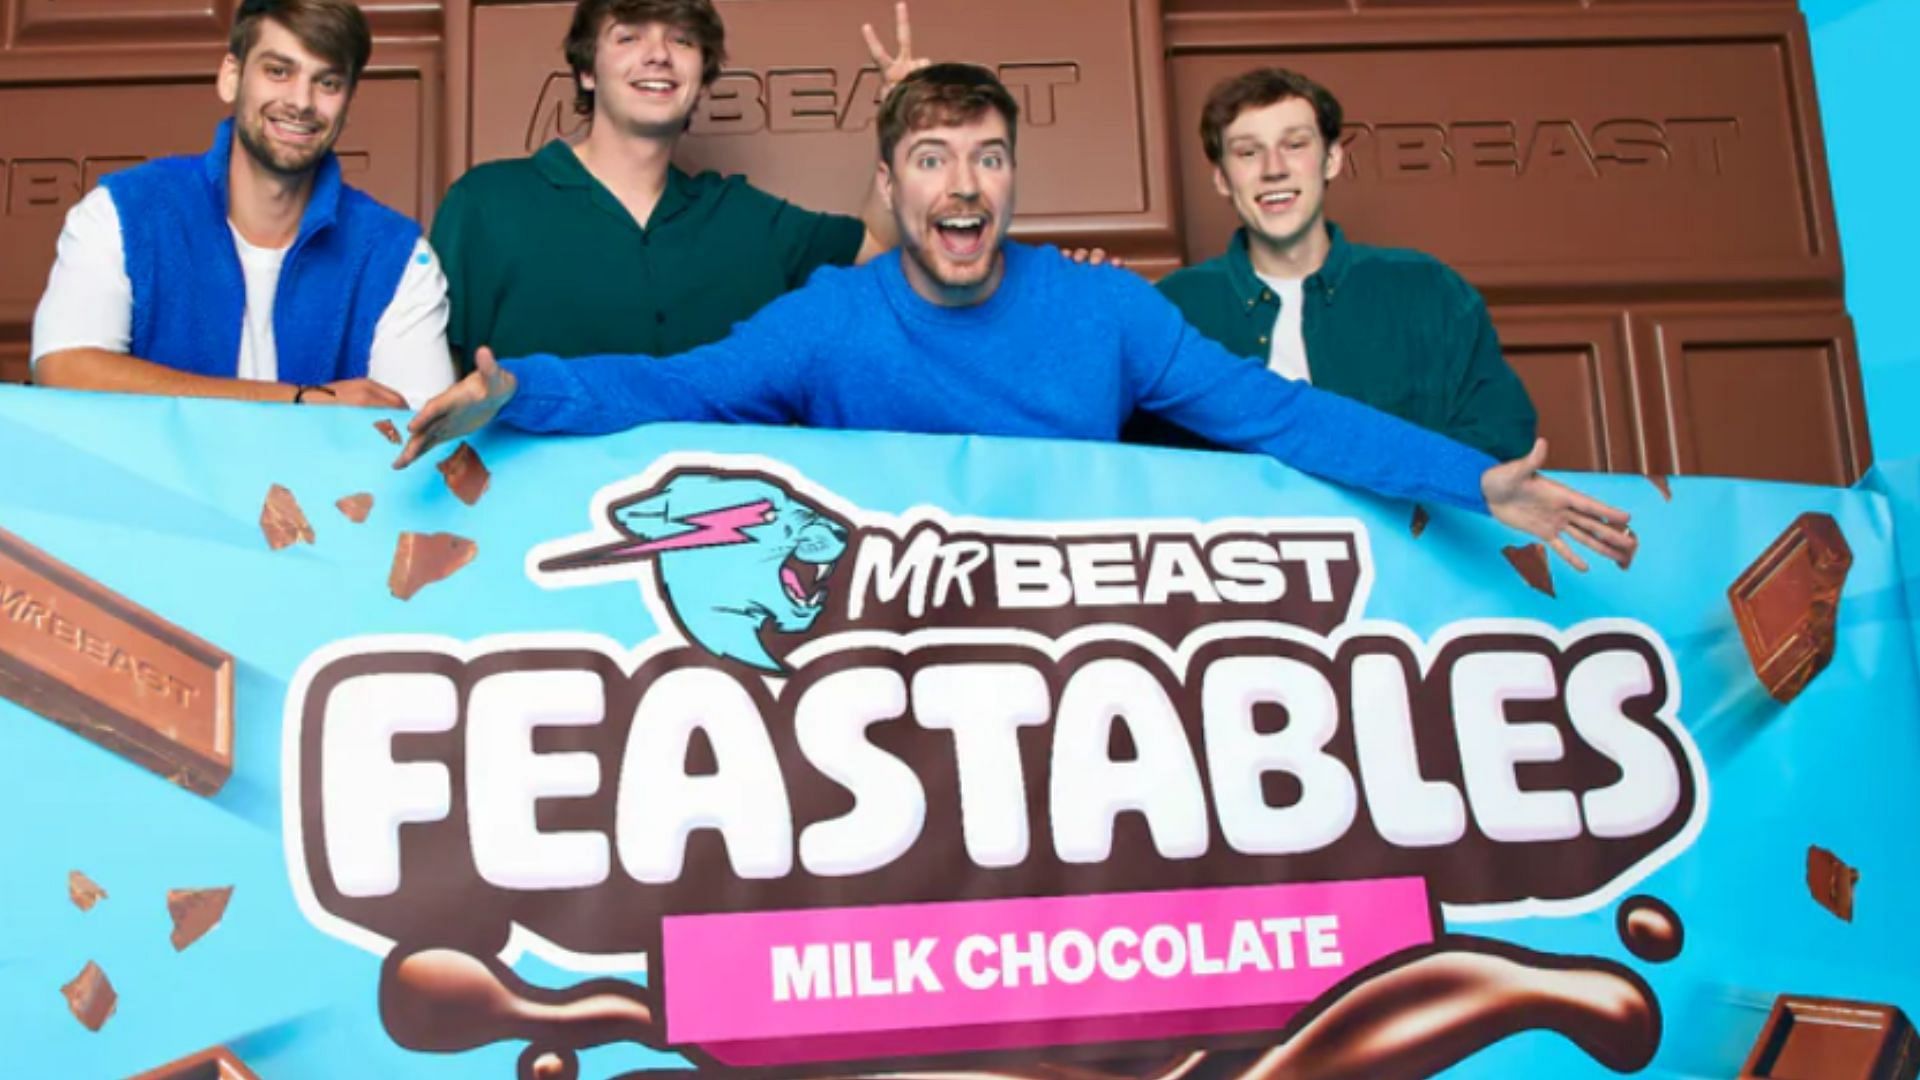 MrBeast started his chocolate brand in 2022 (Image via feastables.com)